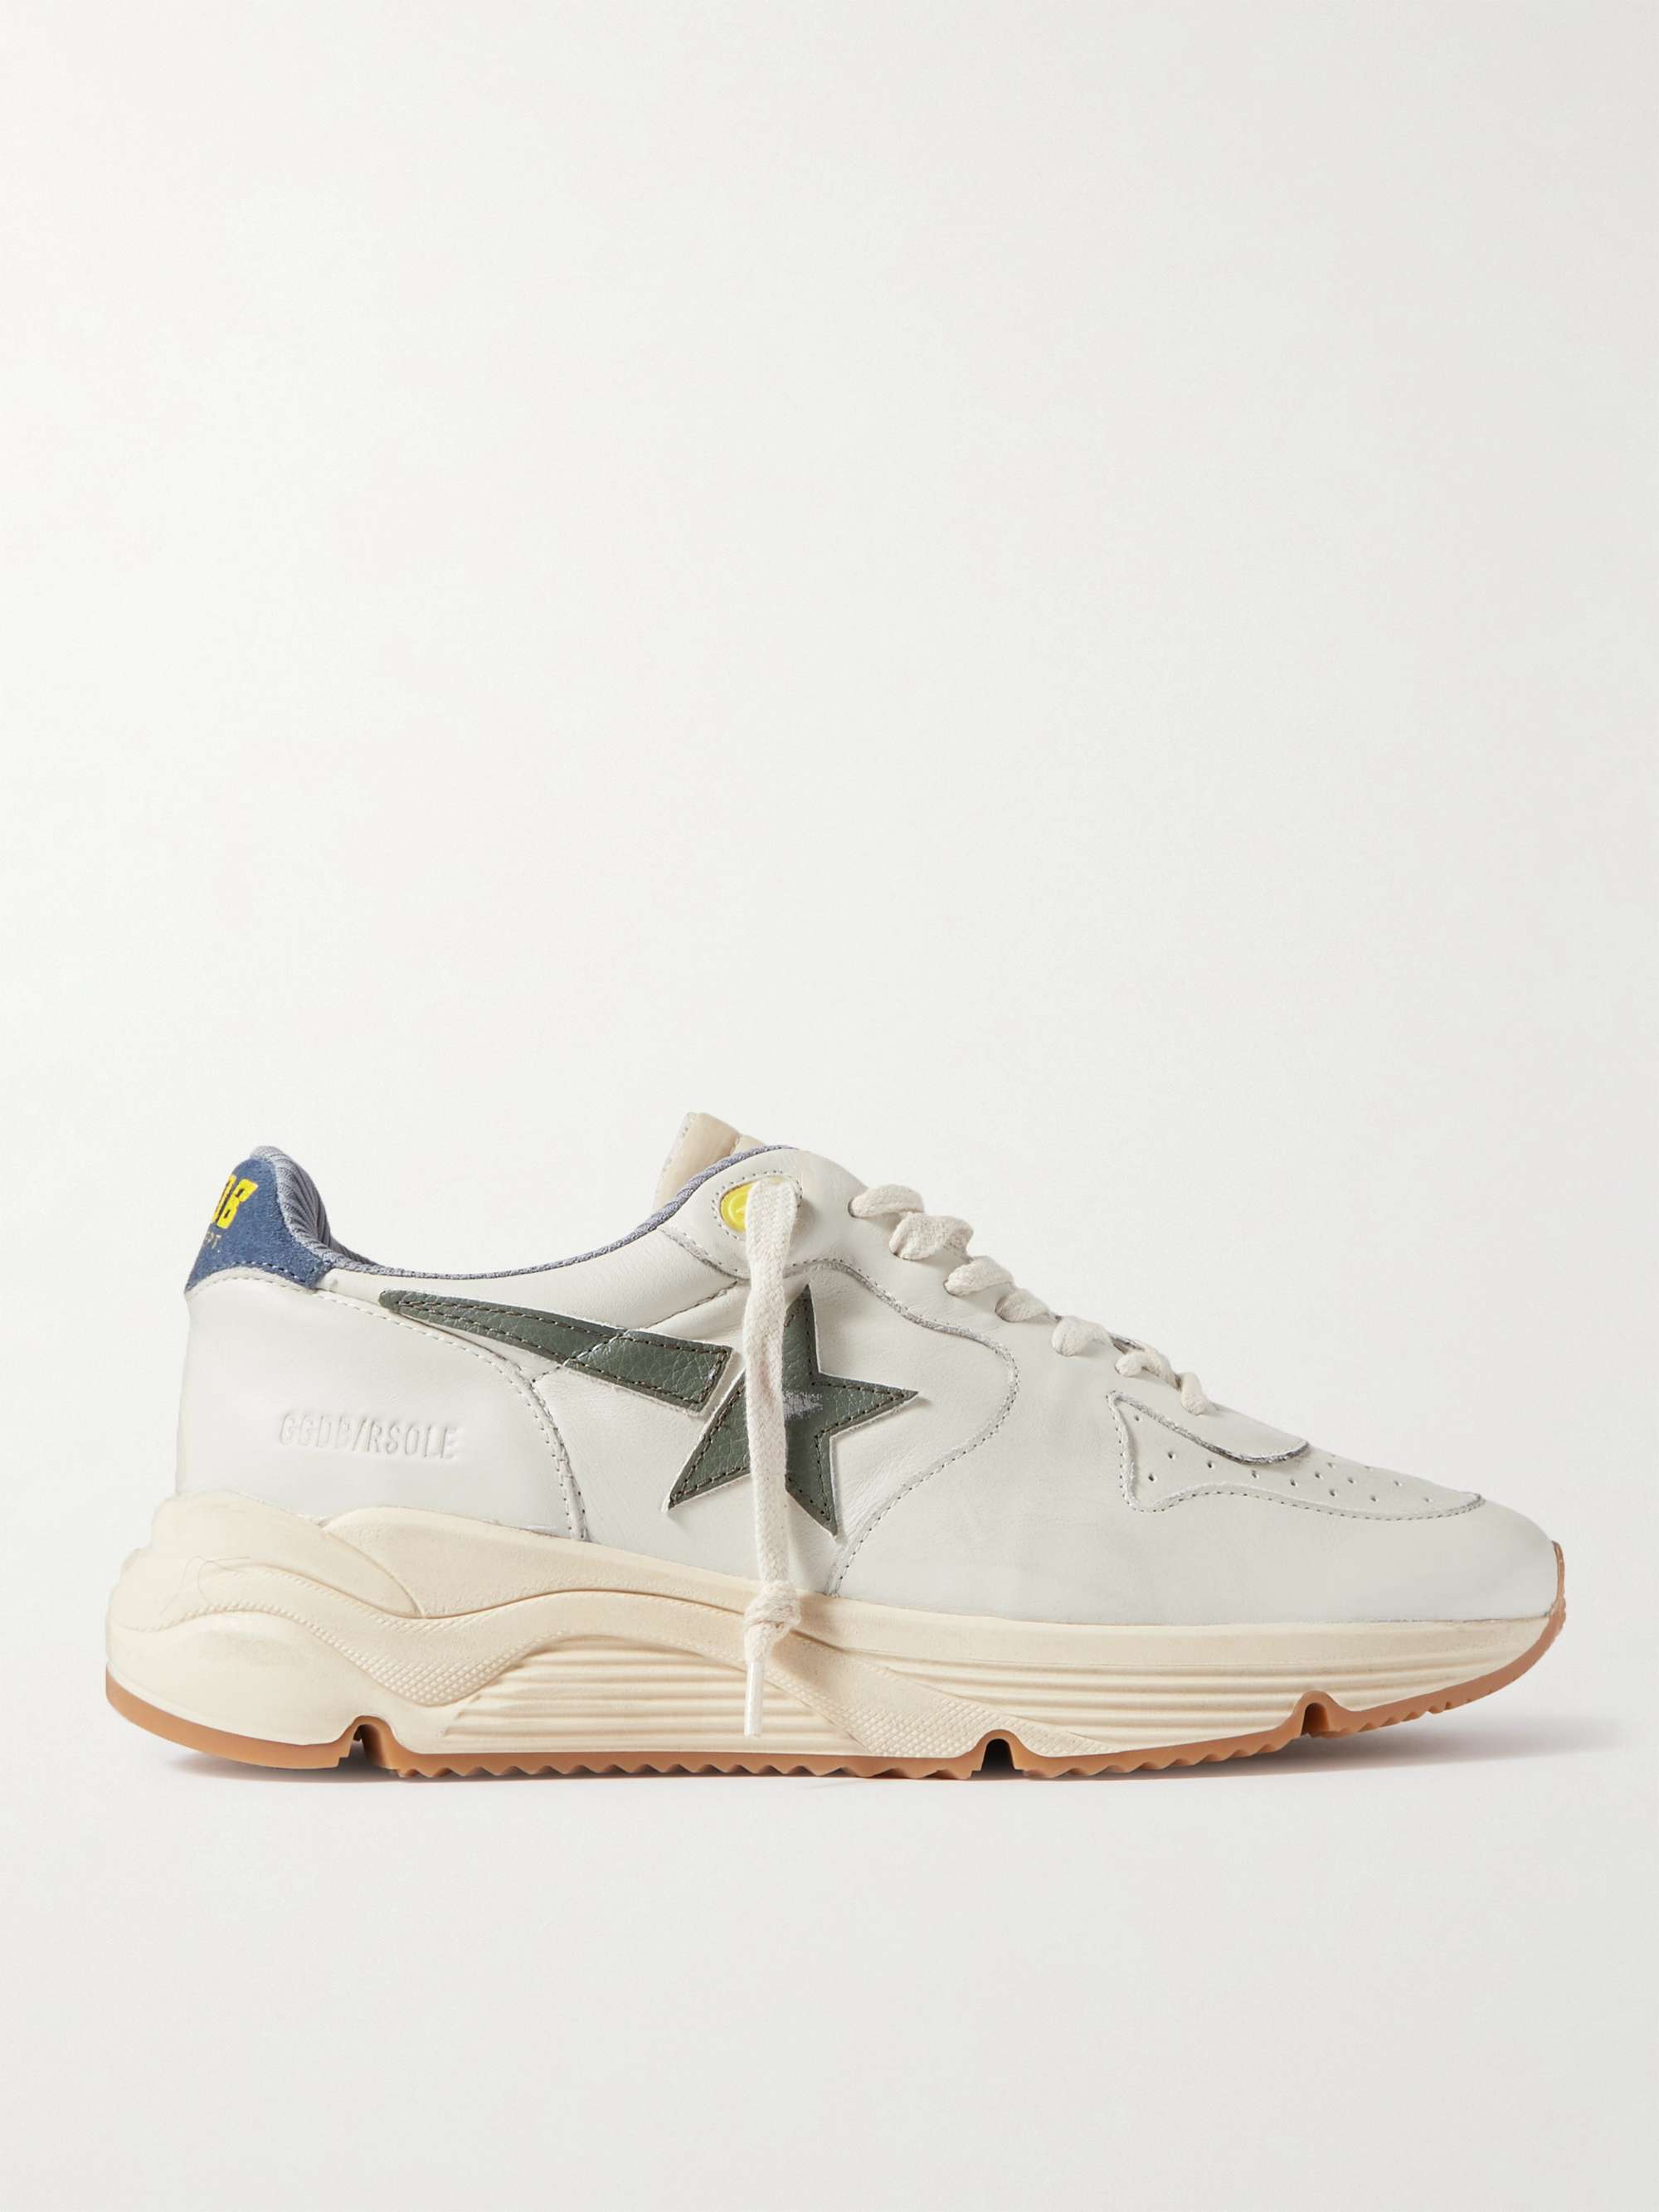 GOLDEN GOOSE Running Sole Distressed Leather, Nylon and Suede Sneakers ...